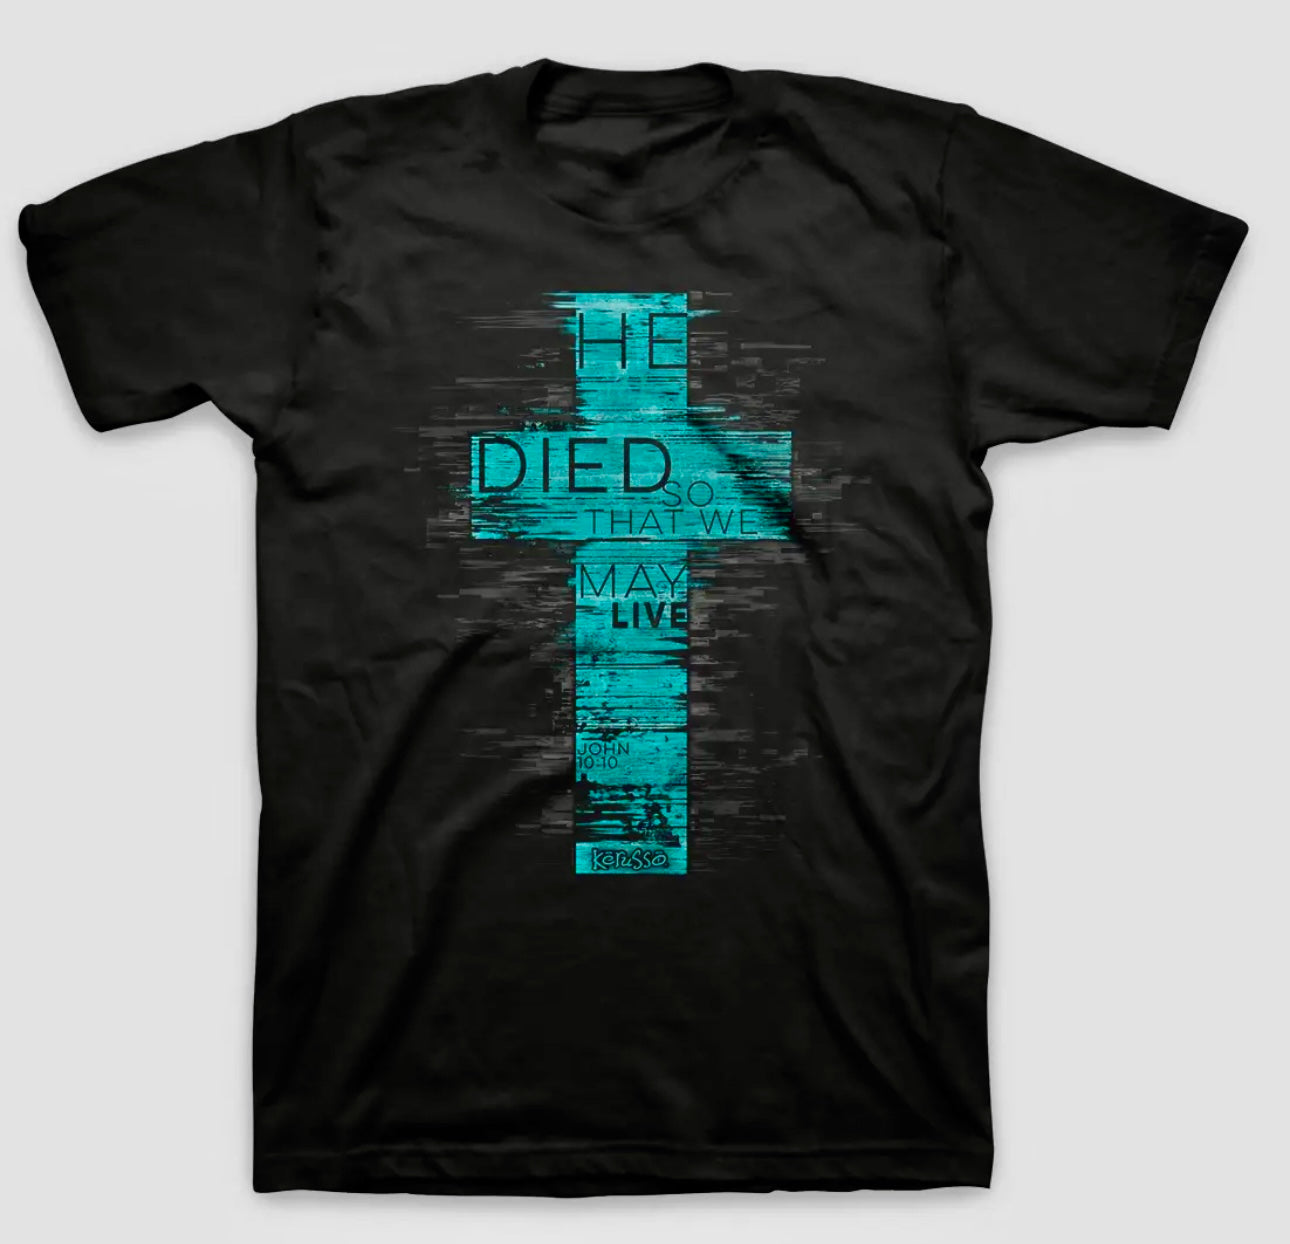 HE DIED SO THAT WE MAY LIVE T-shirt